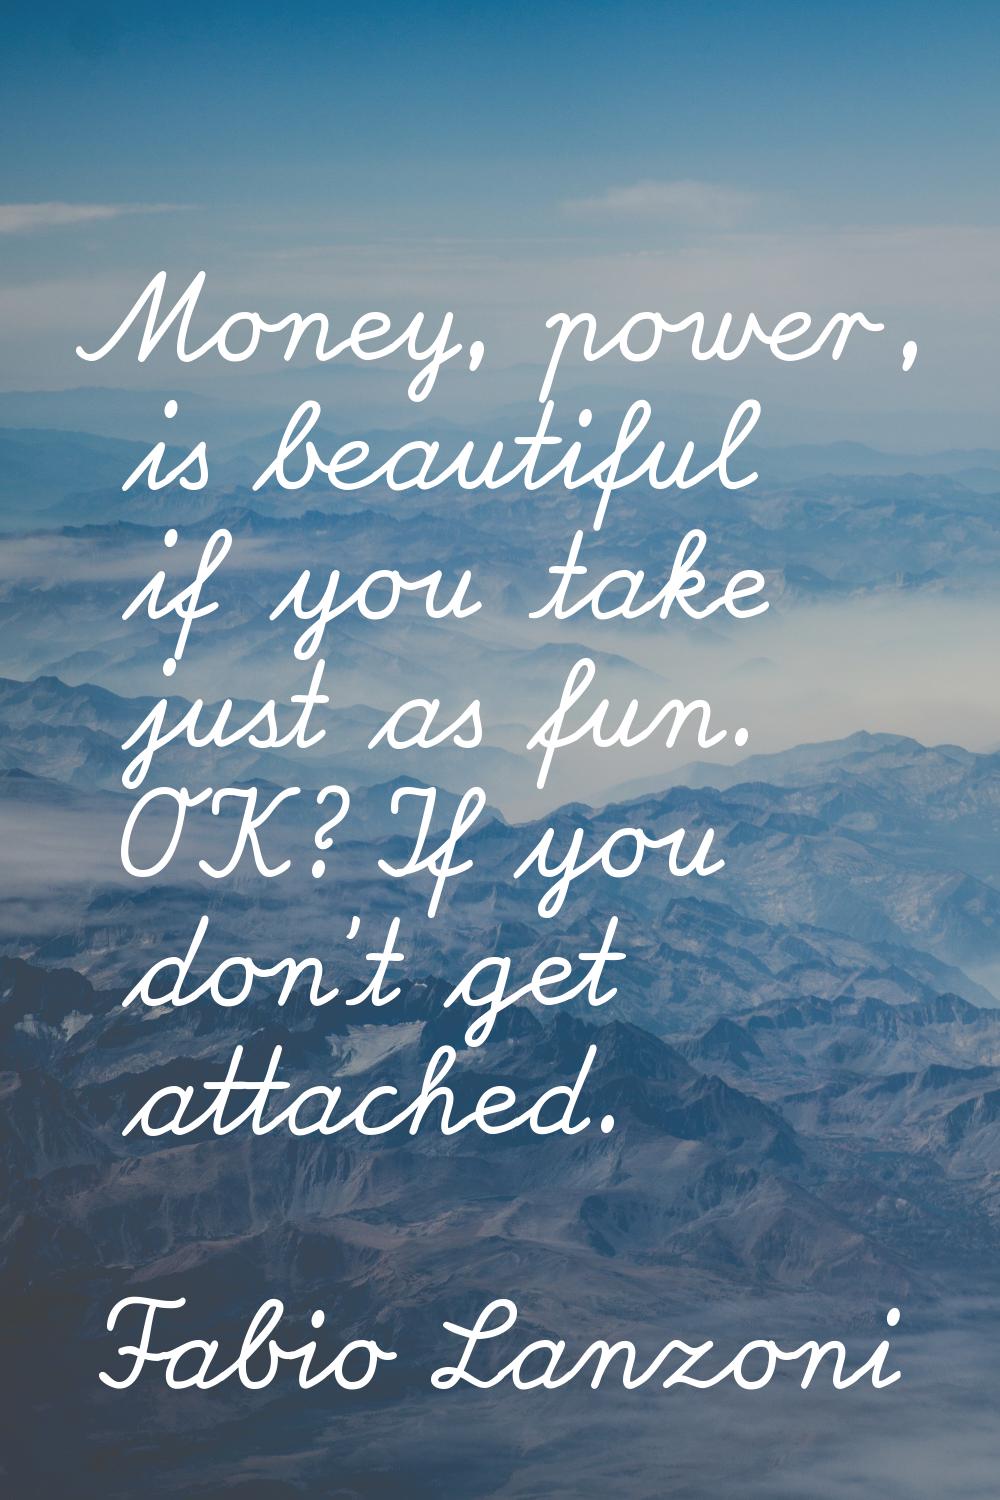 Money, power, is beautiful if you take just as fun. OK? If you don't get attached.